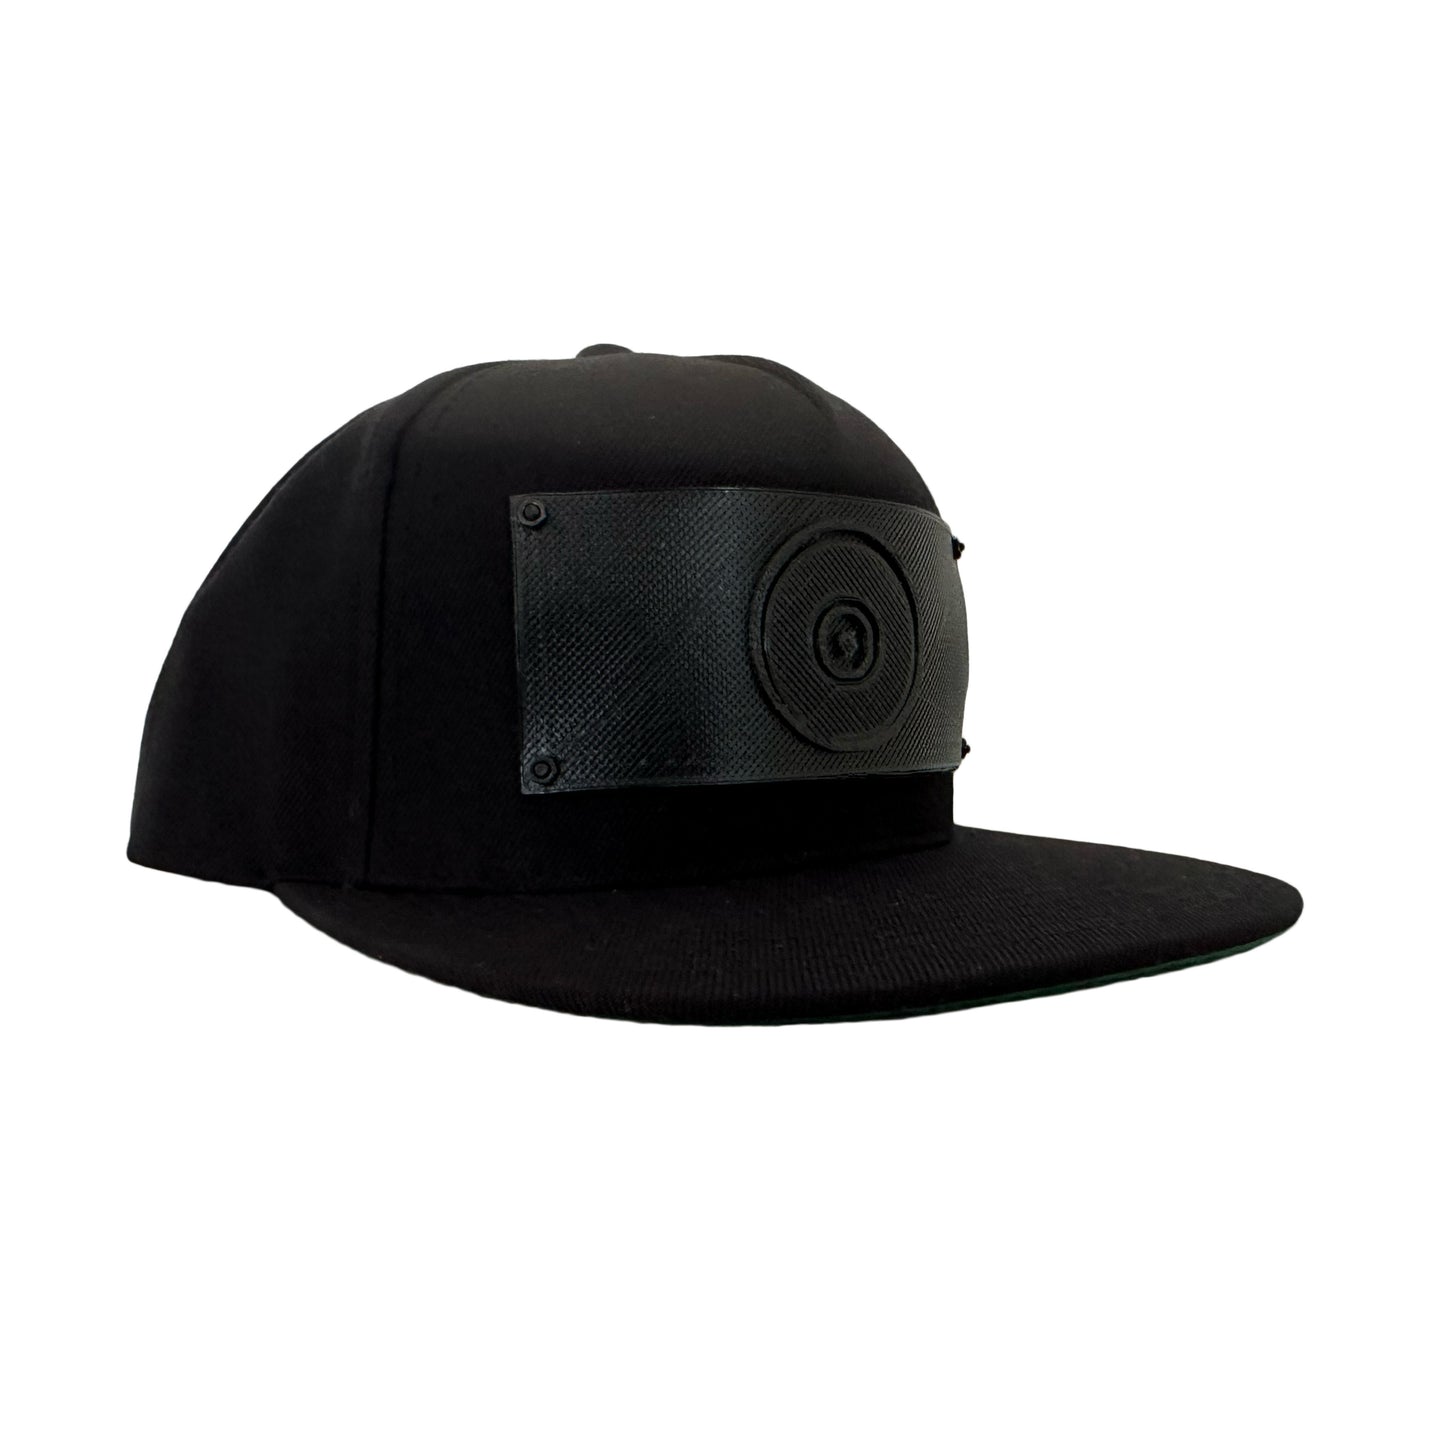 A black snapback baseball hat with a 3D printed black logo panel with an evil eye symbol on it.